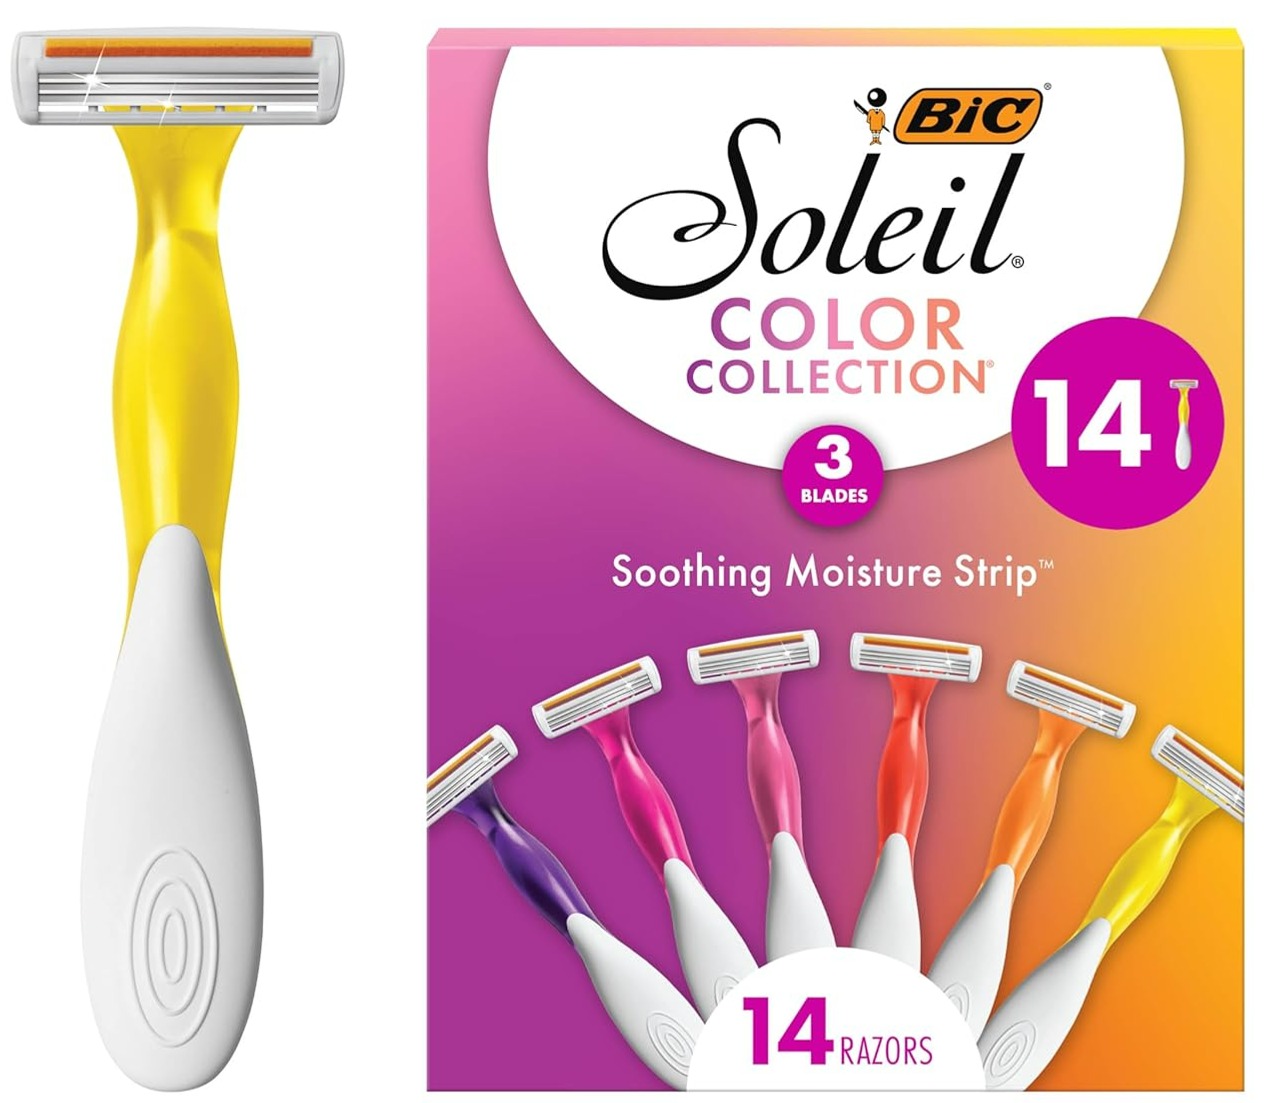 BIC Soleil Smooth Colors Women's Disposable Razors With 3 Blades, 14 Count $10.44